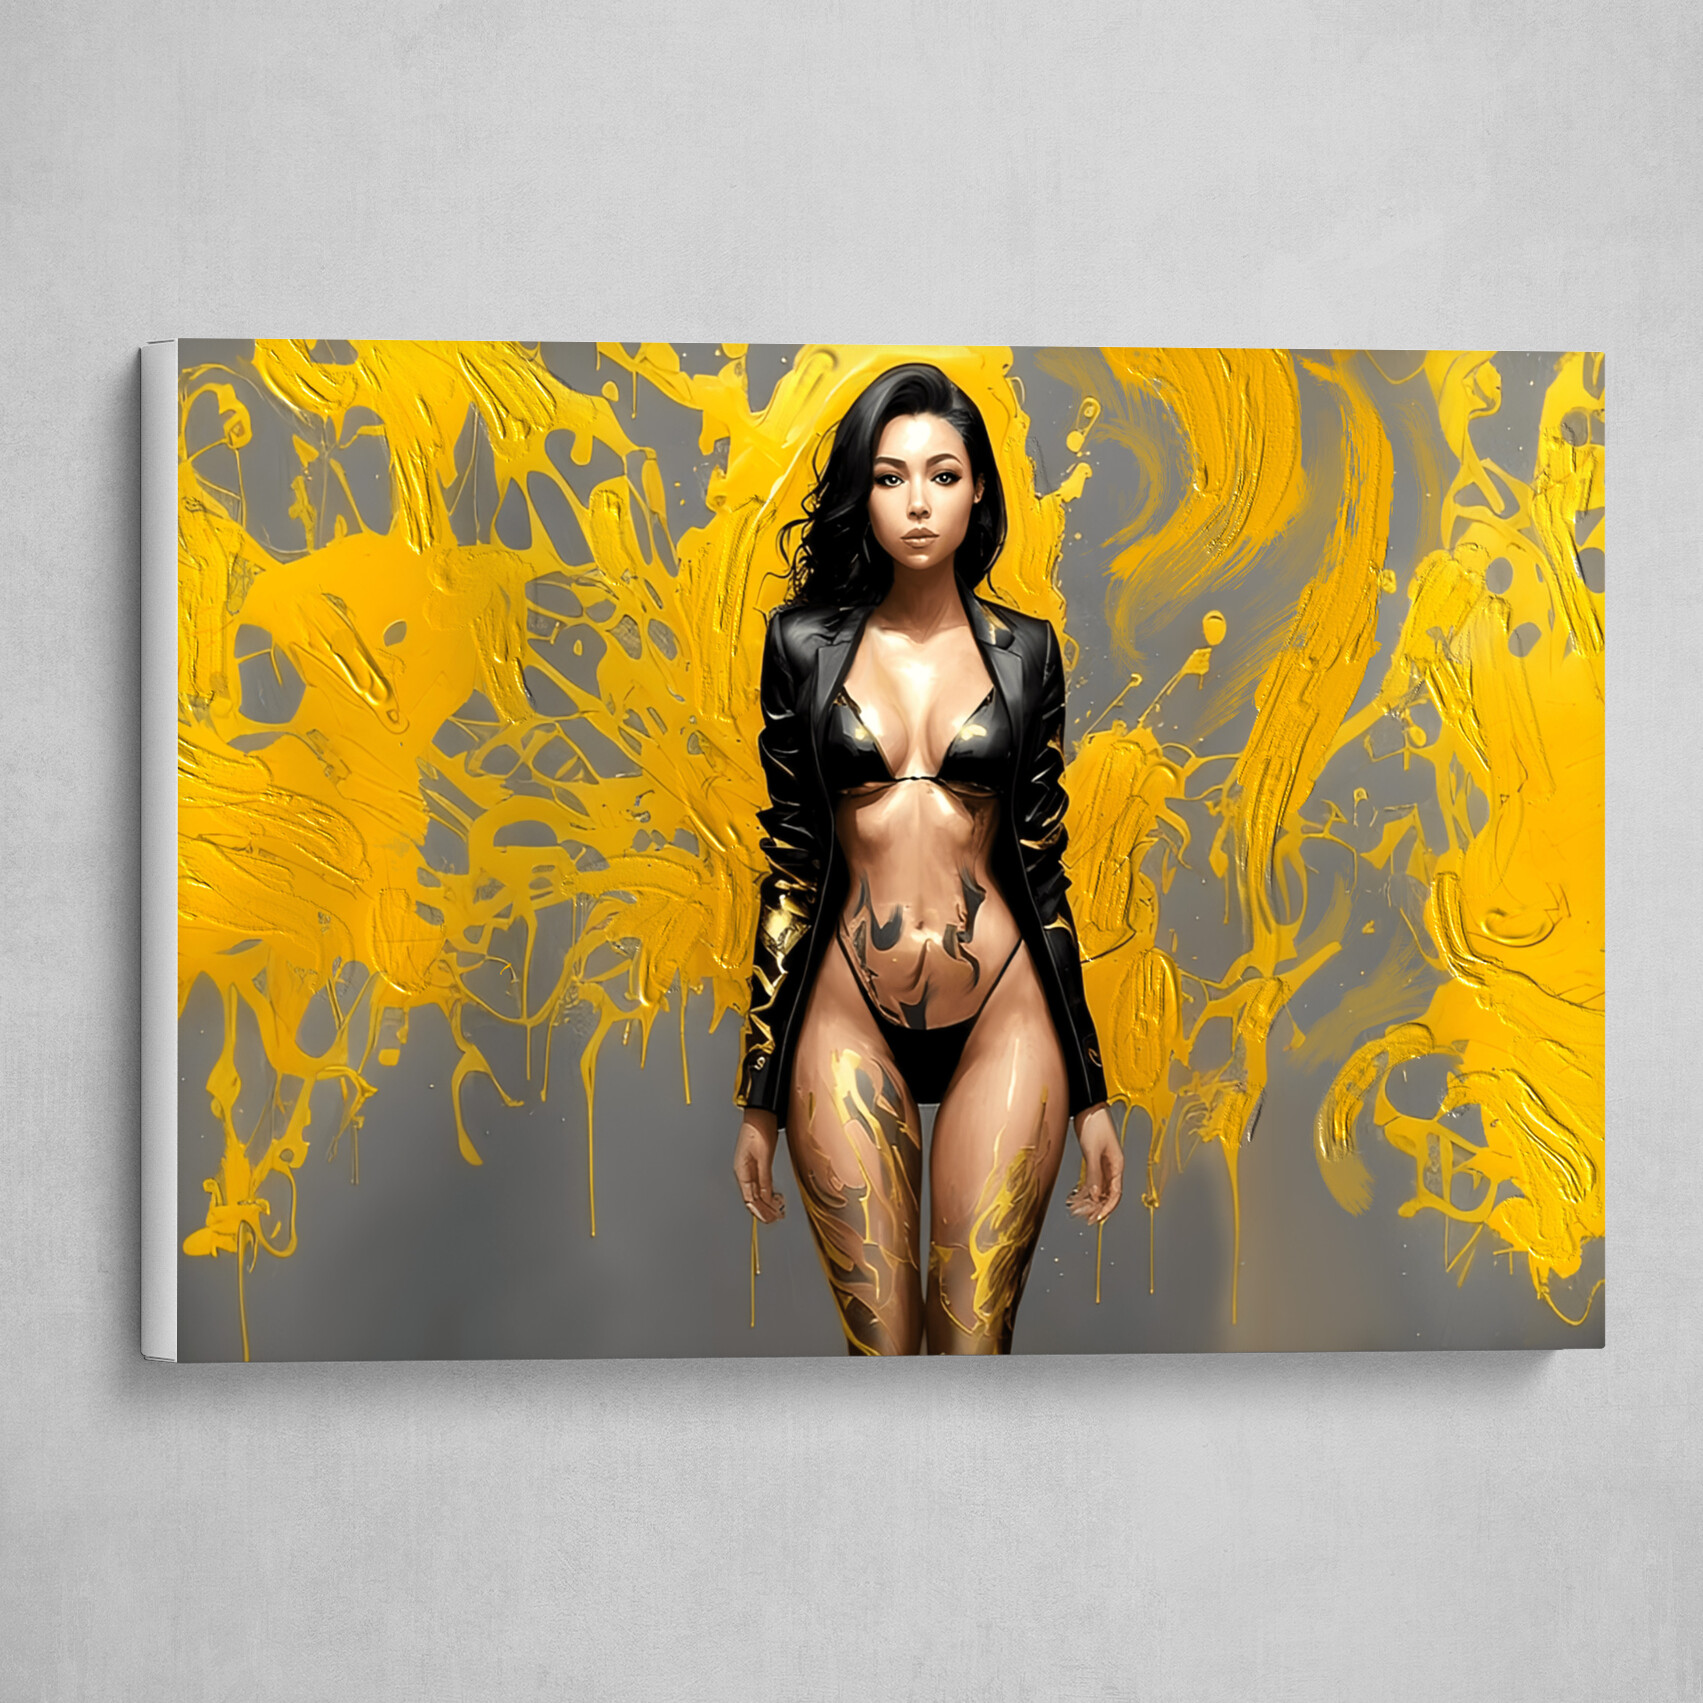 Black and Gold - Abstract body art 12